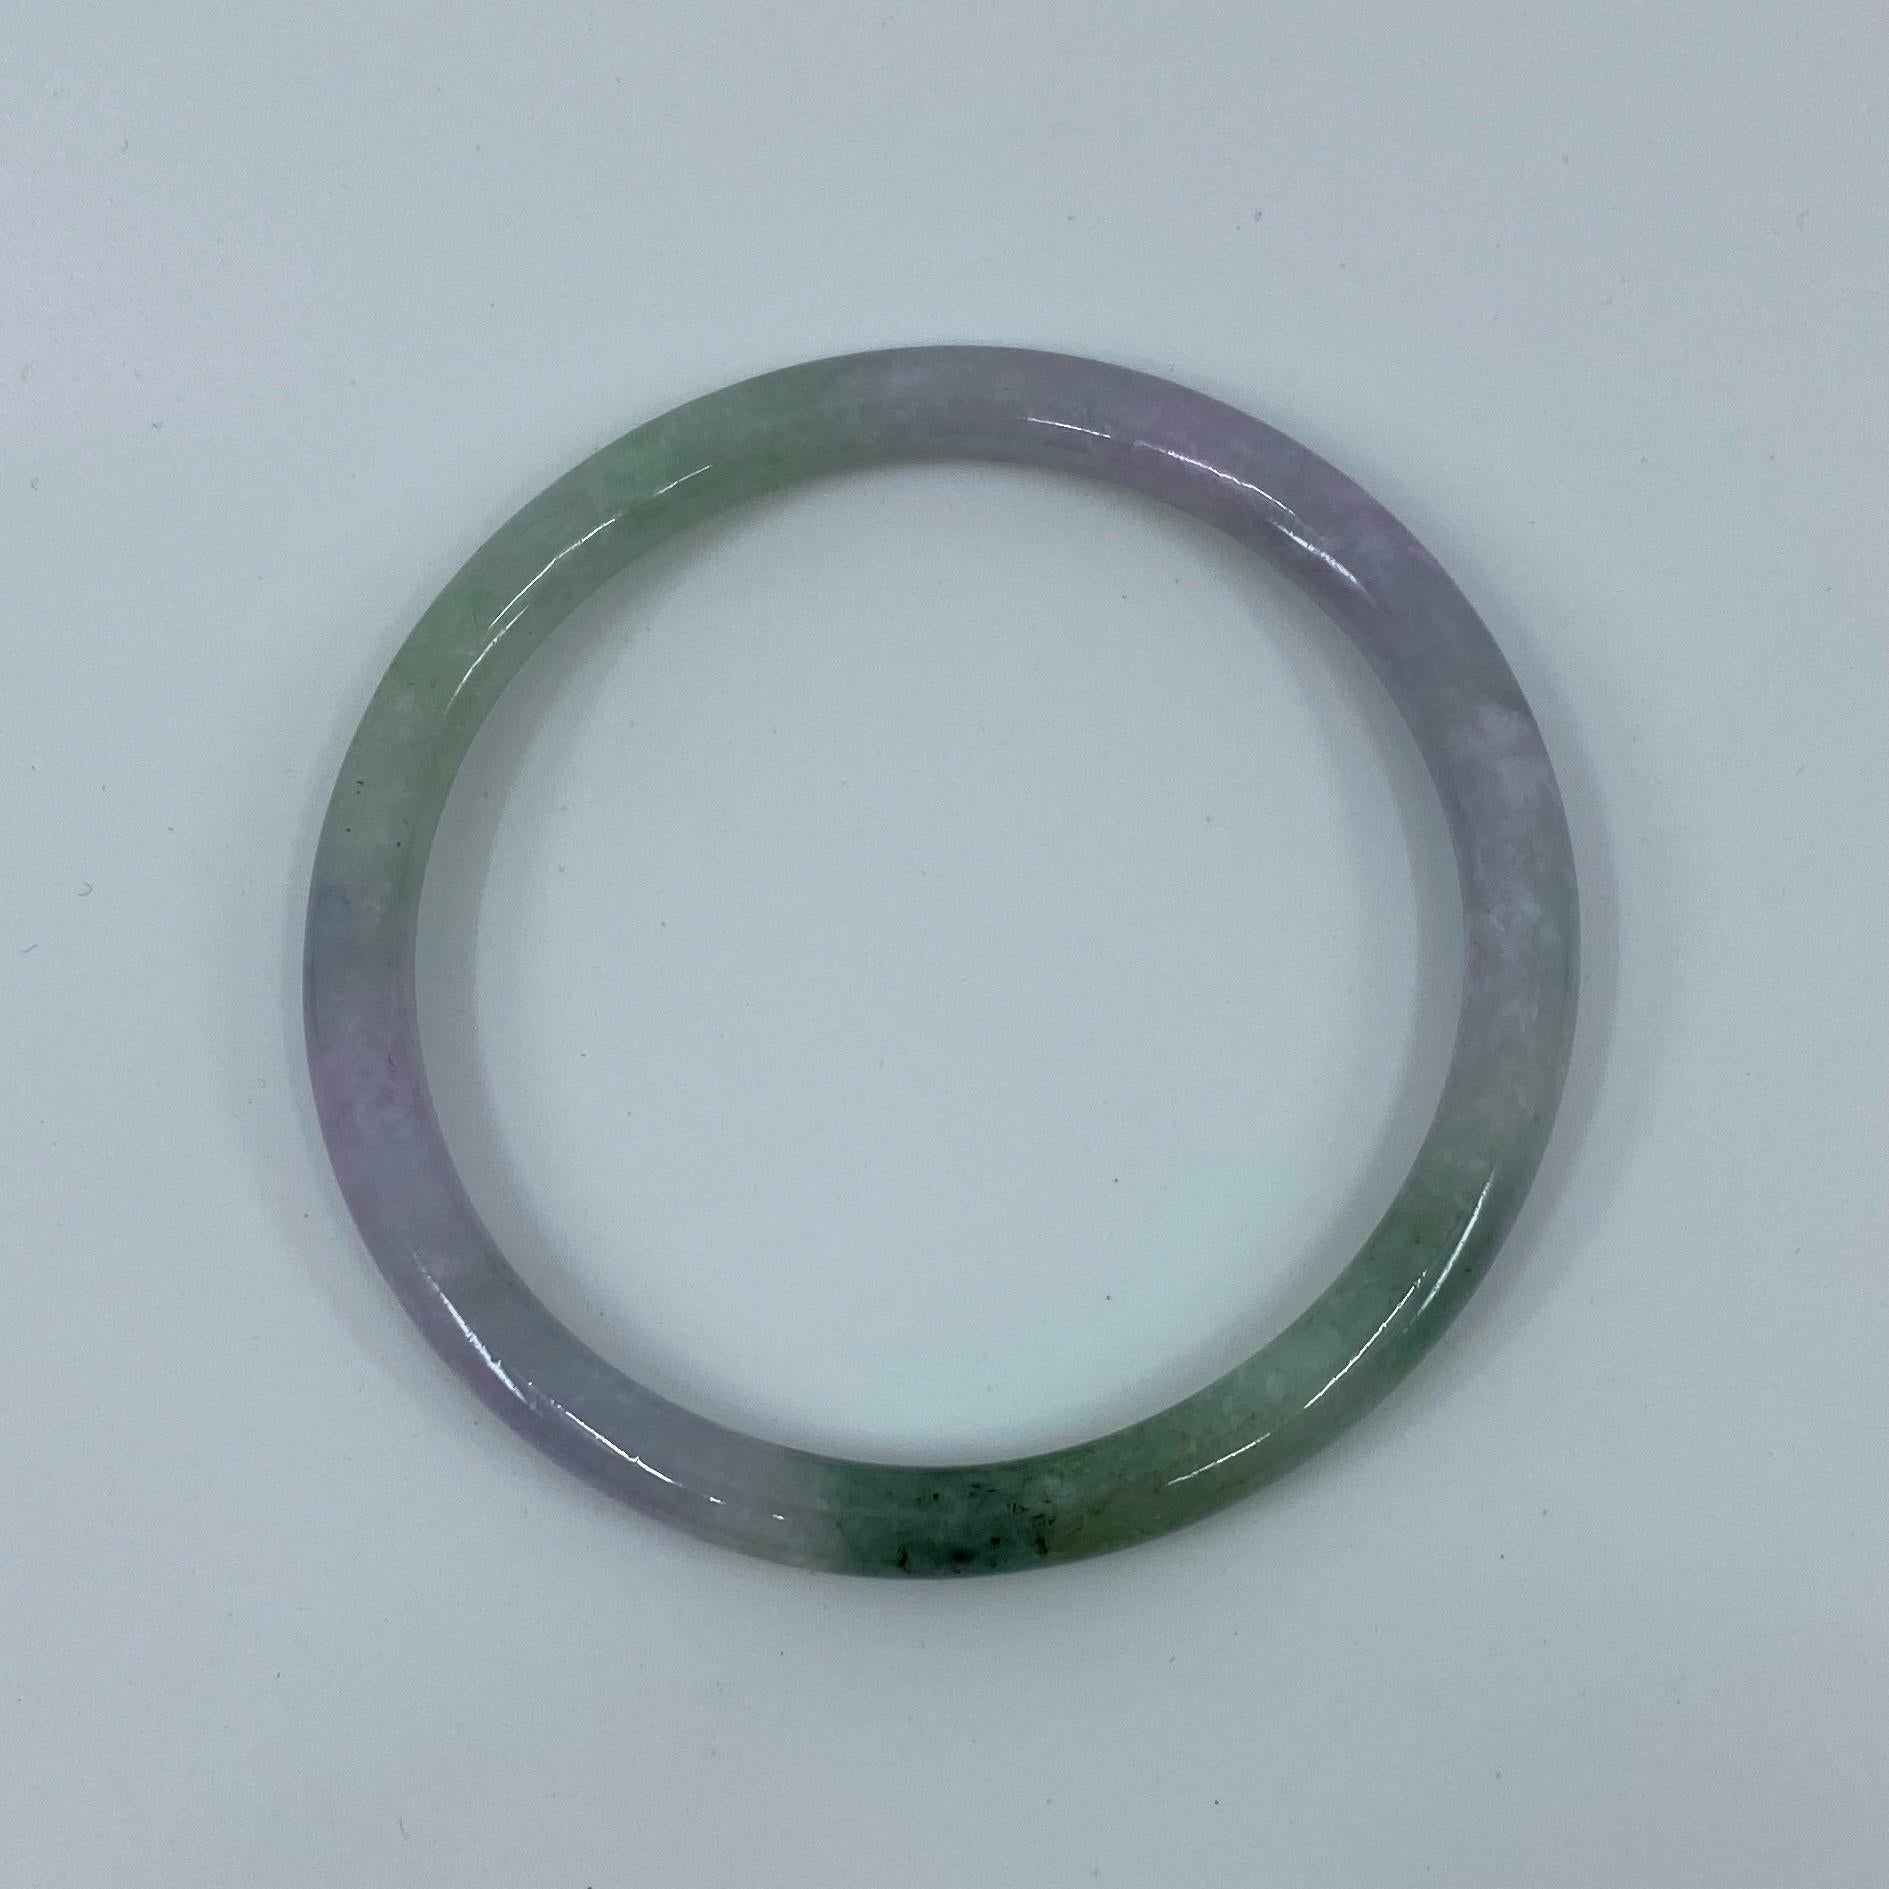 Beautiful natural light green purple/violet jadeite jade bangle.

Has a beautiful mottled light green purple violet colour with an excellent polish and lustre with no cracks or chips.

This is a treated jadeite bracelet, as to be expected of such a